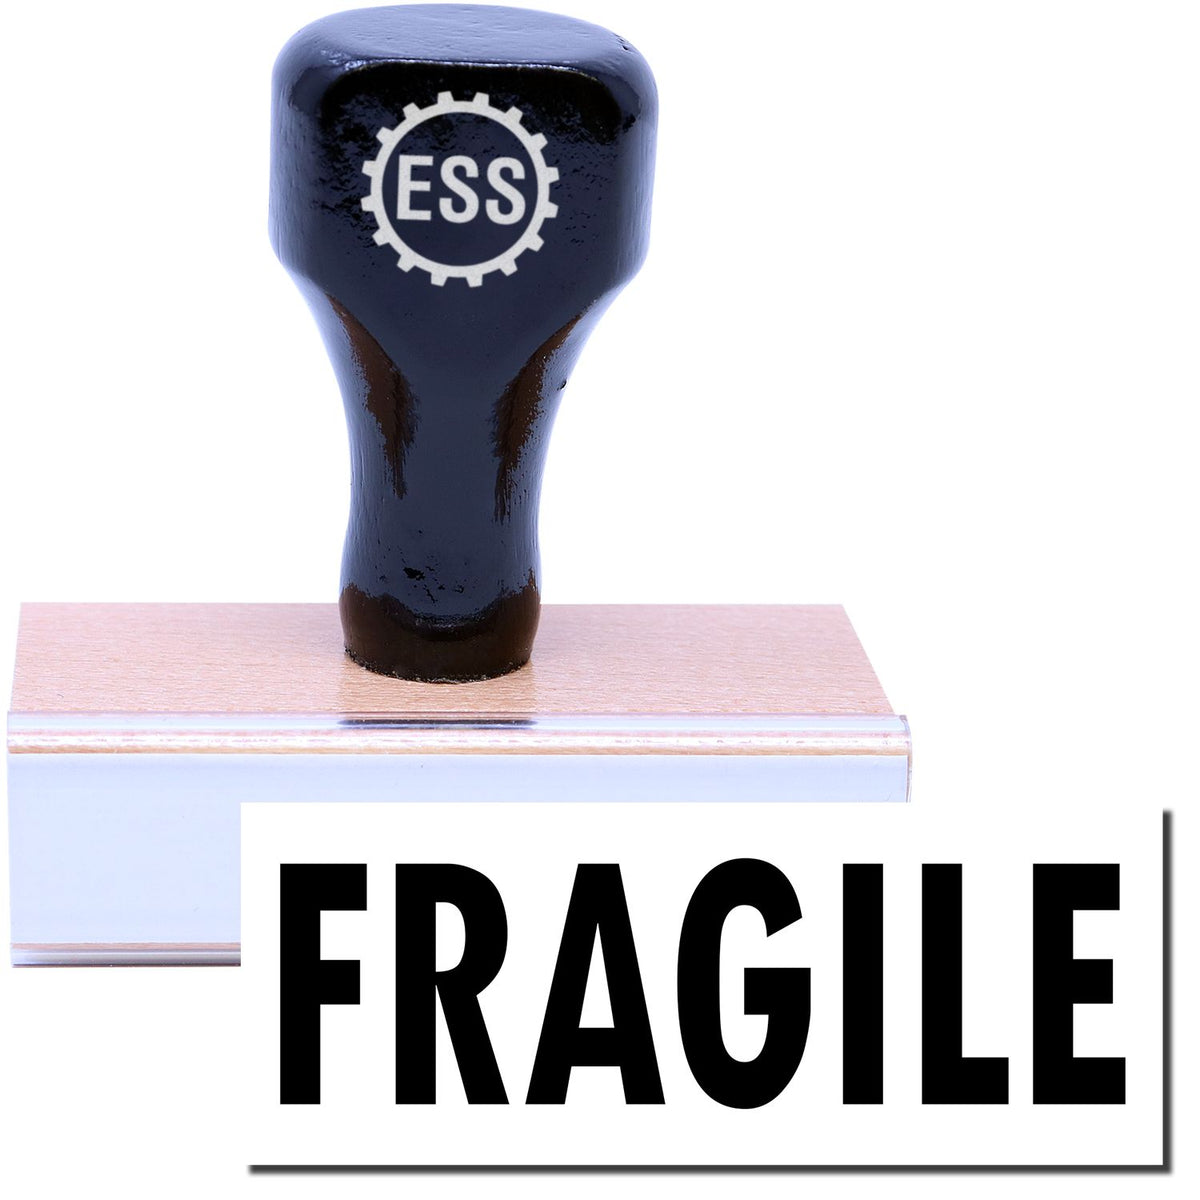 A stock office rubber stamp with a stamped image showing how the text &quot;FRAGILE&quot; in a large font is displayed after stamping.